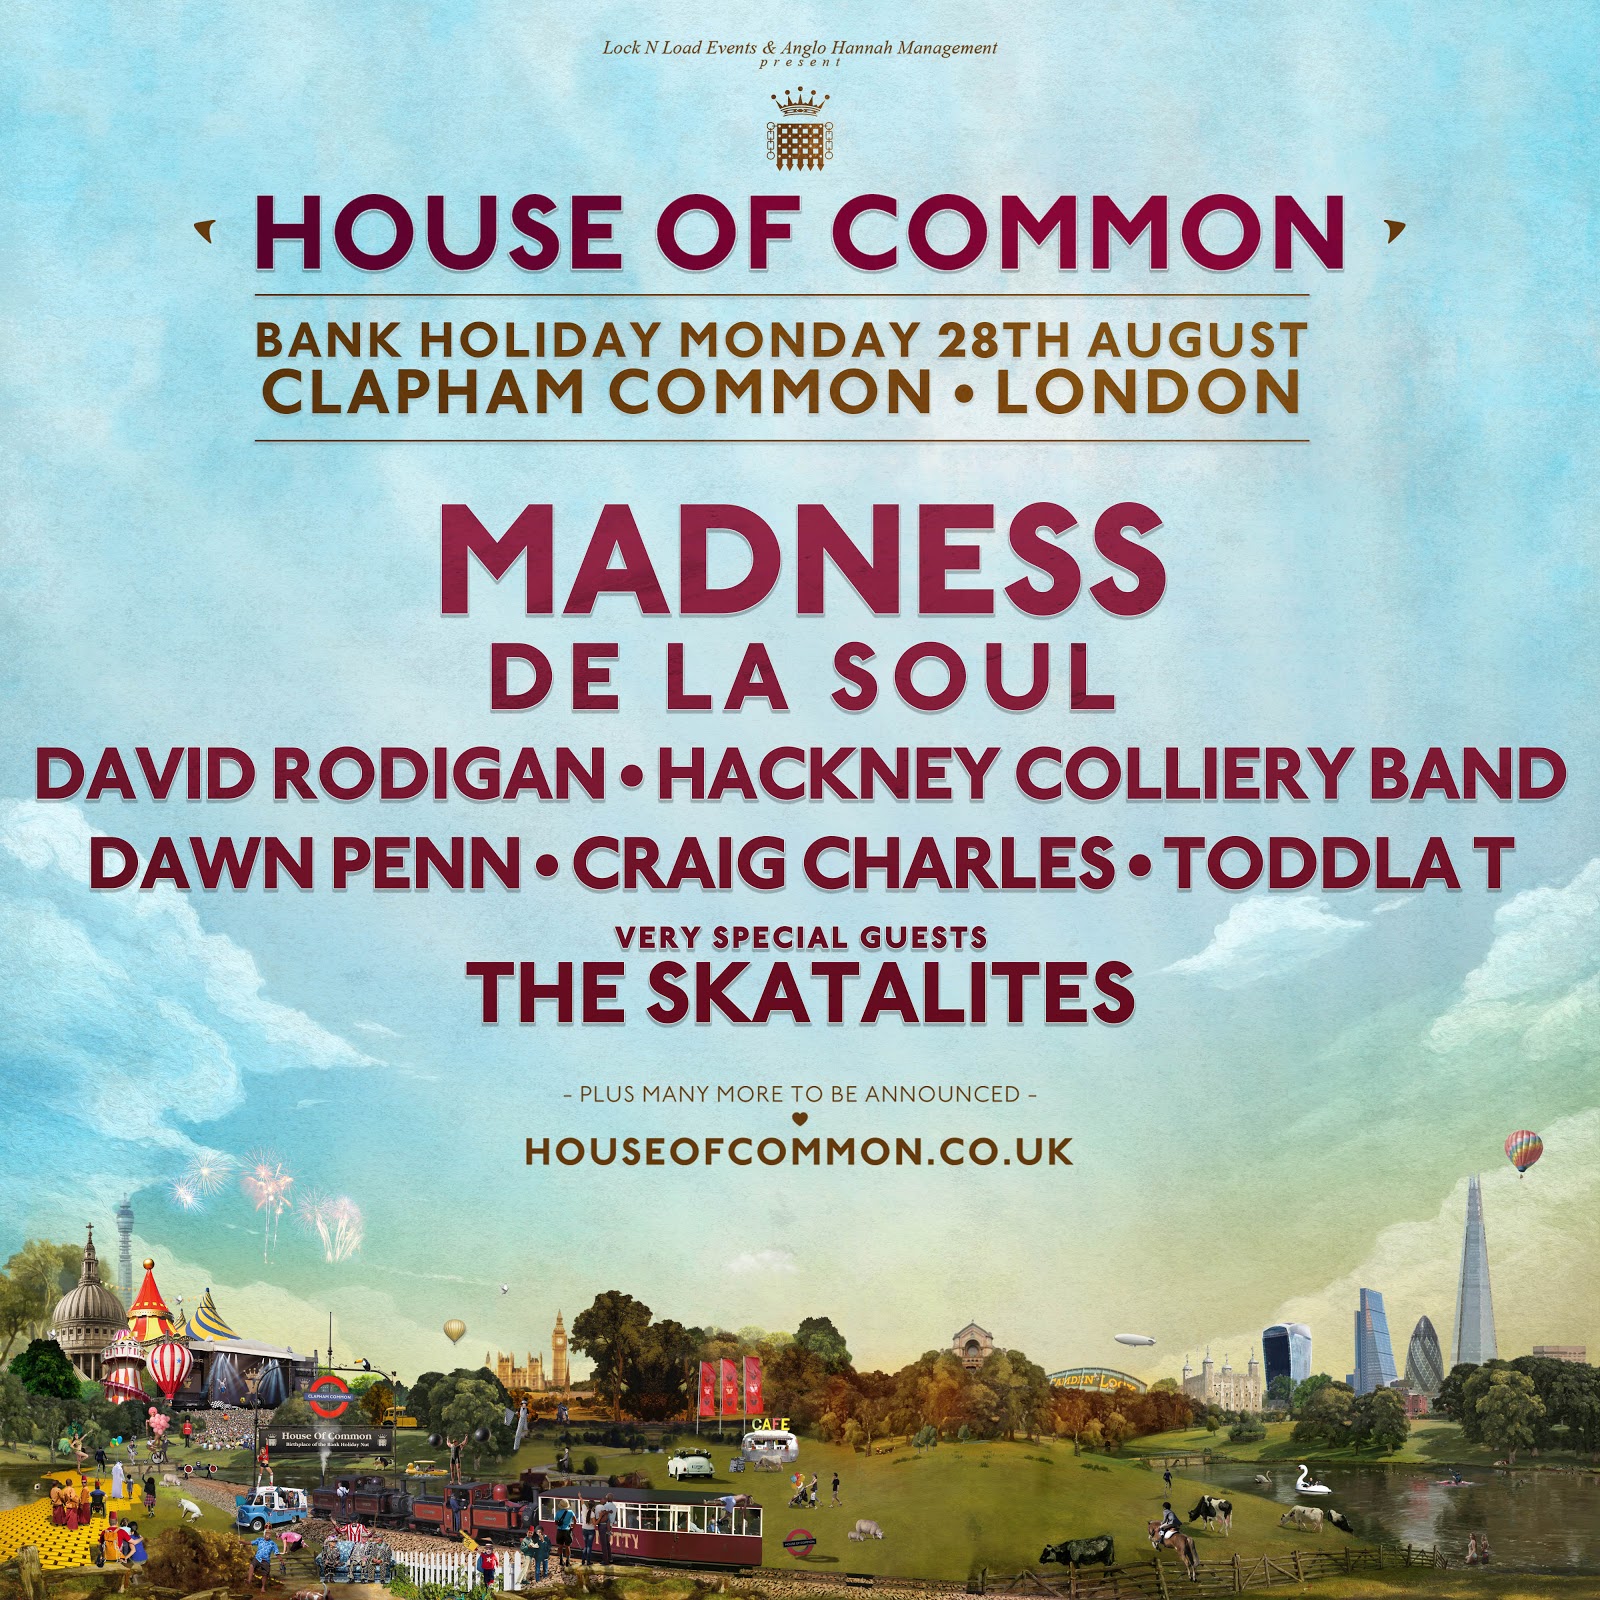 House of Common announce Craig Charles, Dawn Penn, Hackney Colliery Band, Toddla T